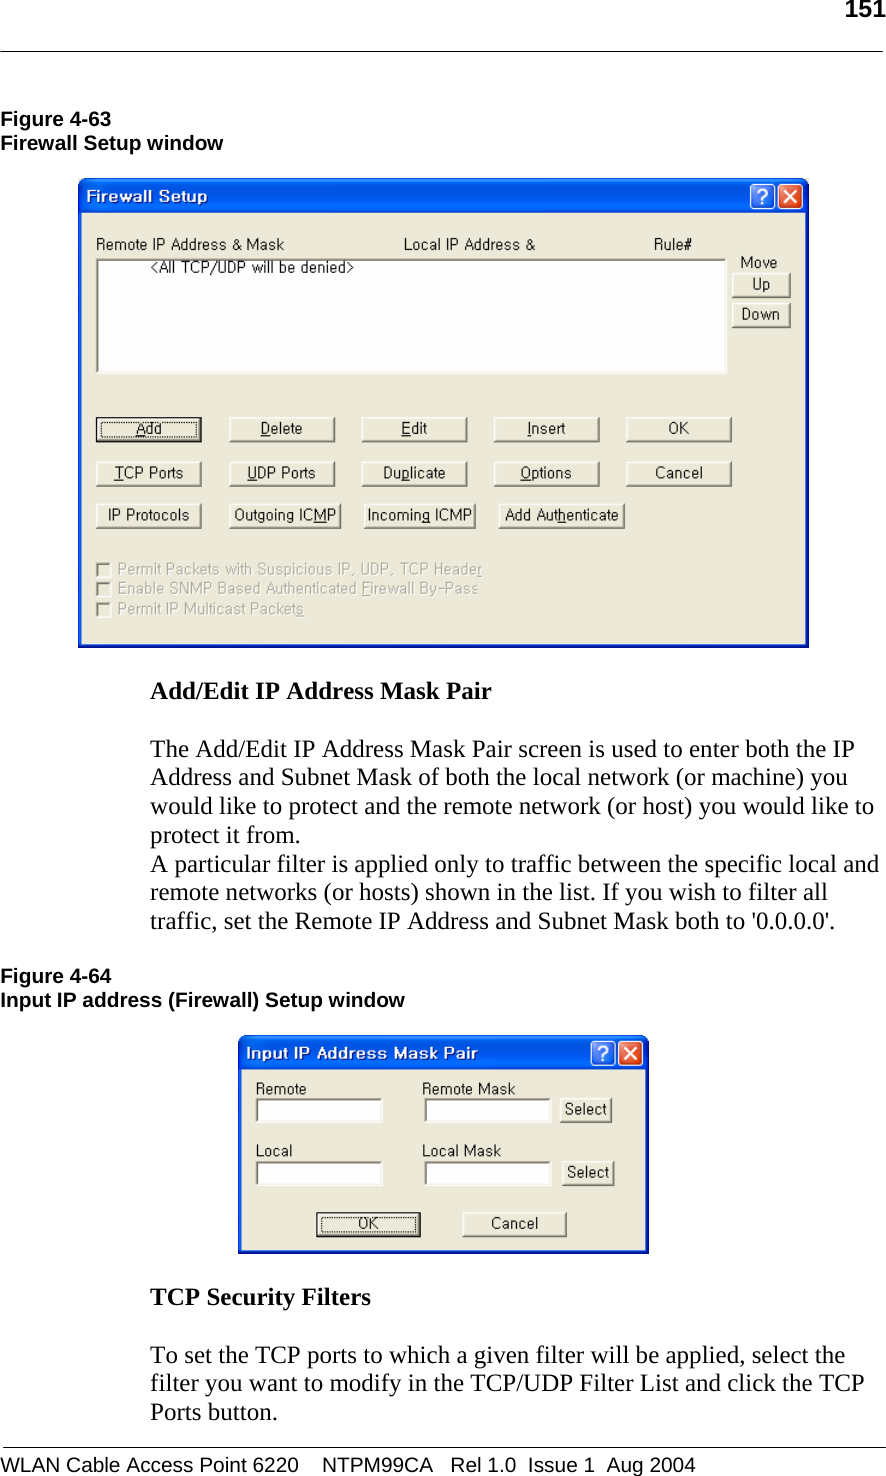   151  Figure 4-63 Firewall Setup window    Add/Edit IP Address Mask Pair   The Add/Edit IP Address Mask Pair screen is used to enter both the IP Address and Subnet Mask of both the local network (or machine) you would like to protect and the remote network (or host) you would like to protect it from. A particular filter is applied only to traffic between the specific local and remote networks (or hosts) shown in the list. If you wish to filter all traffic, set the Remote IP Address and Subnet Mask both to &apos;0.0.0.0&apos;.  Figure 4-64 Input IP address (Firewall) Setup window    TCP Security Filters   To set the TCP ports to which a given filter will be applied, select the  filter you want to modify in the TCP/UDP Filter List and click the TCP Ports button. WLAN Cable Access Point 6220    NTPM99CA   Rel 1.0  Issue 1  Aug 2004 